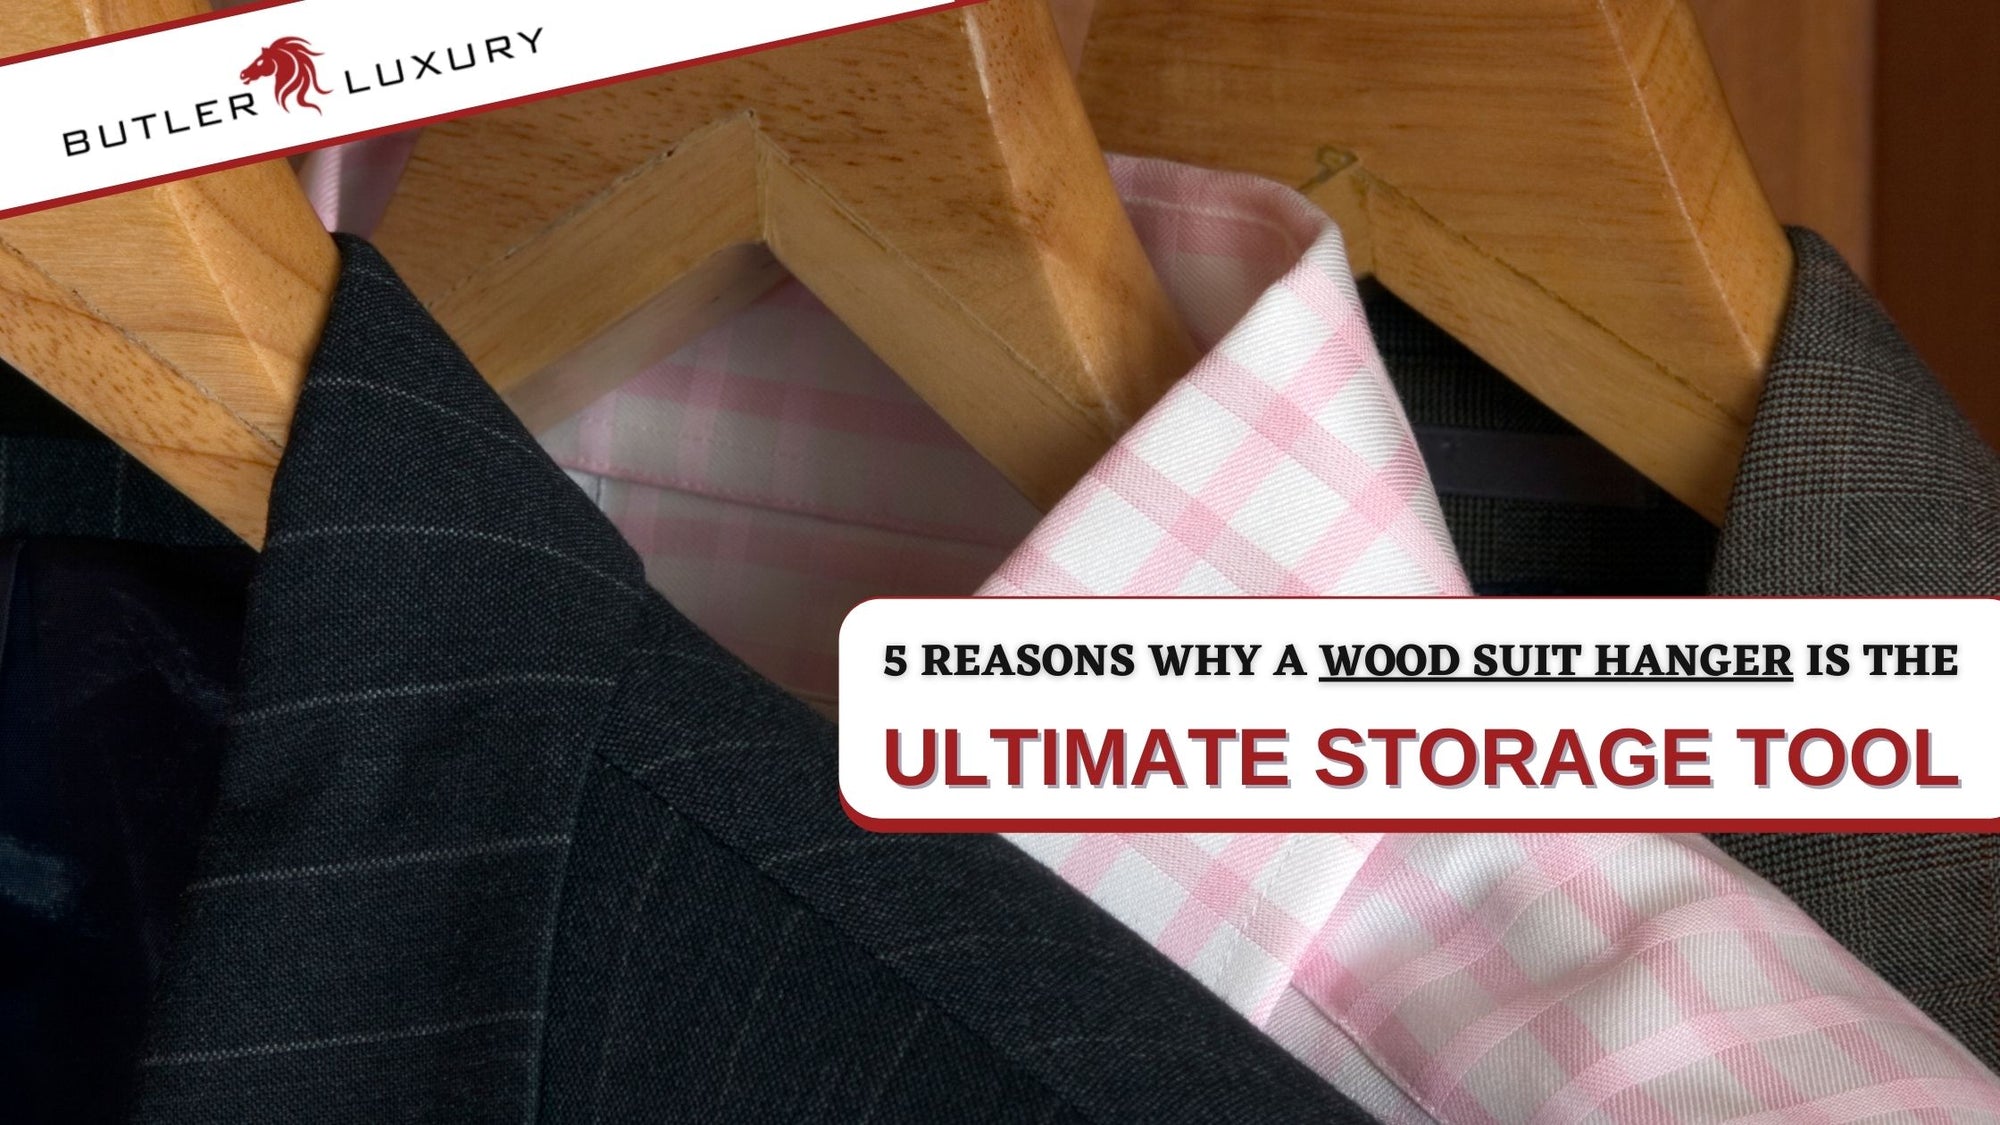 5 Reasons Why a Wood Suit Hanger is the Ultimate Storage Tool